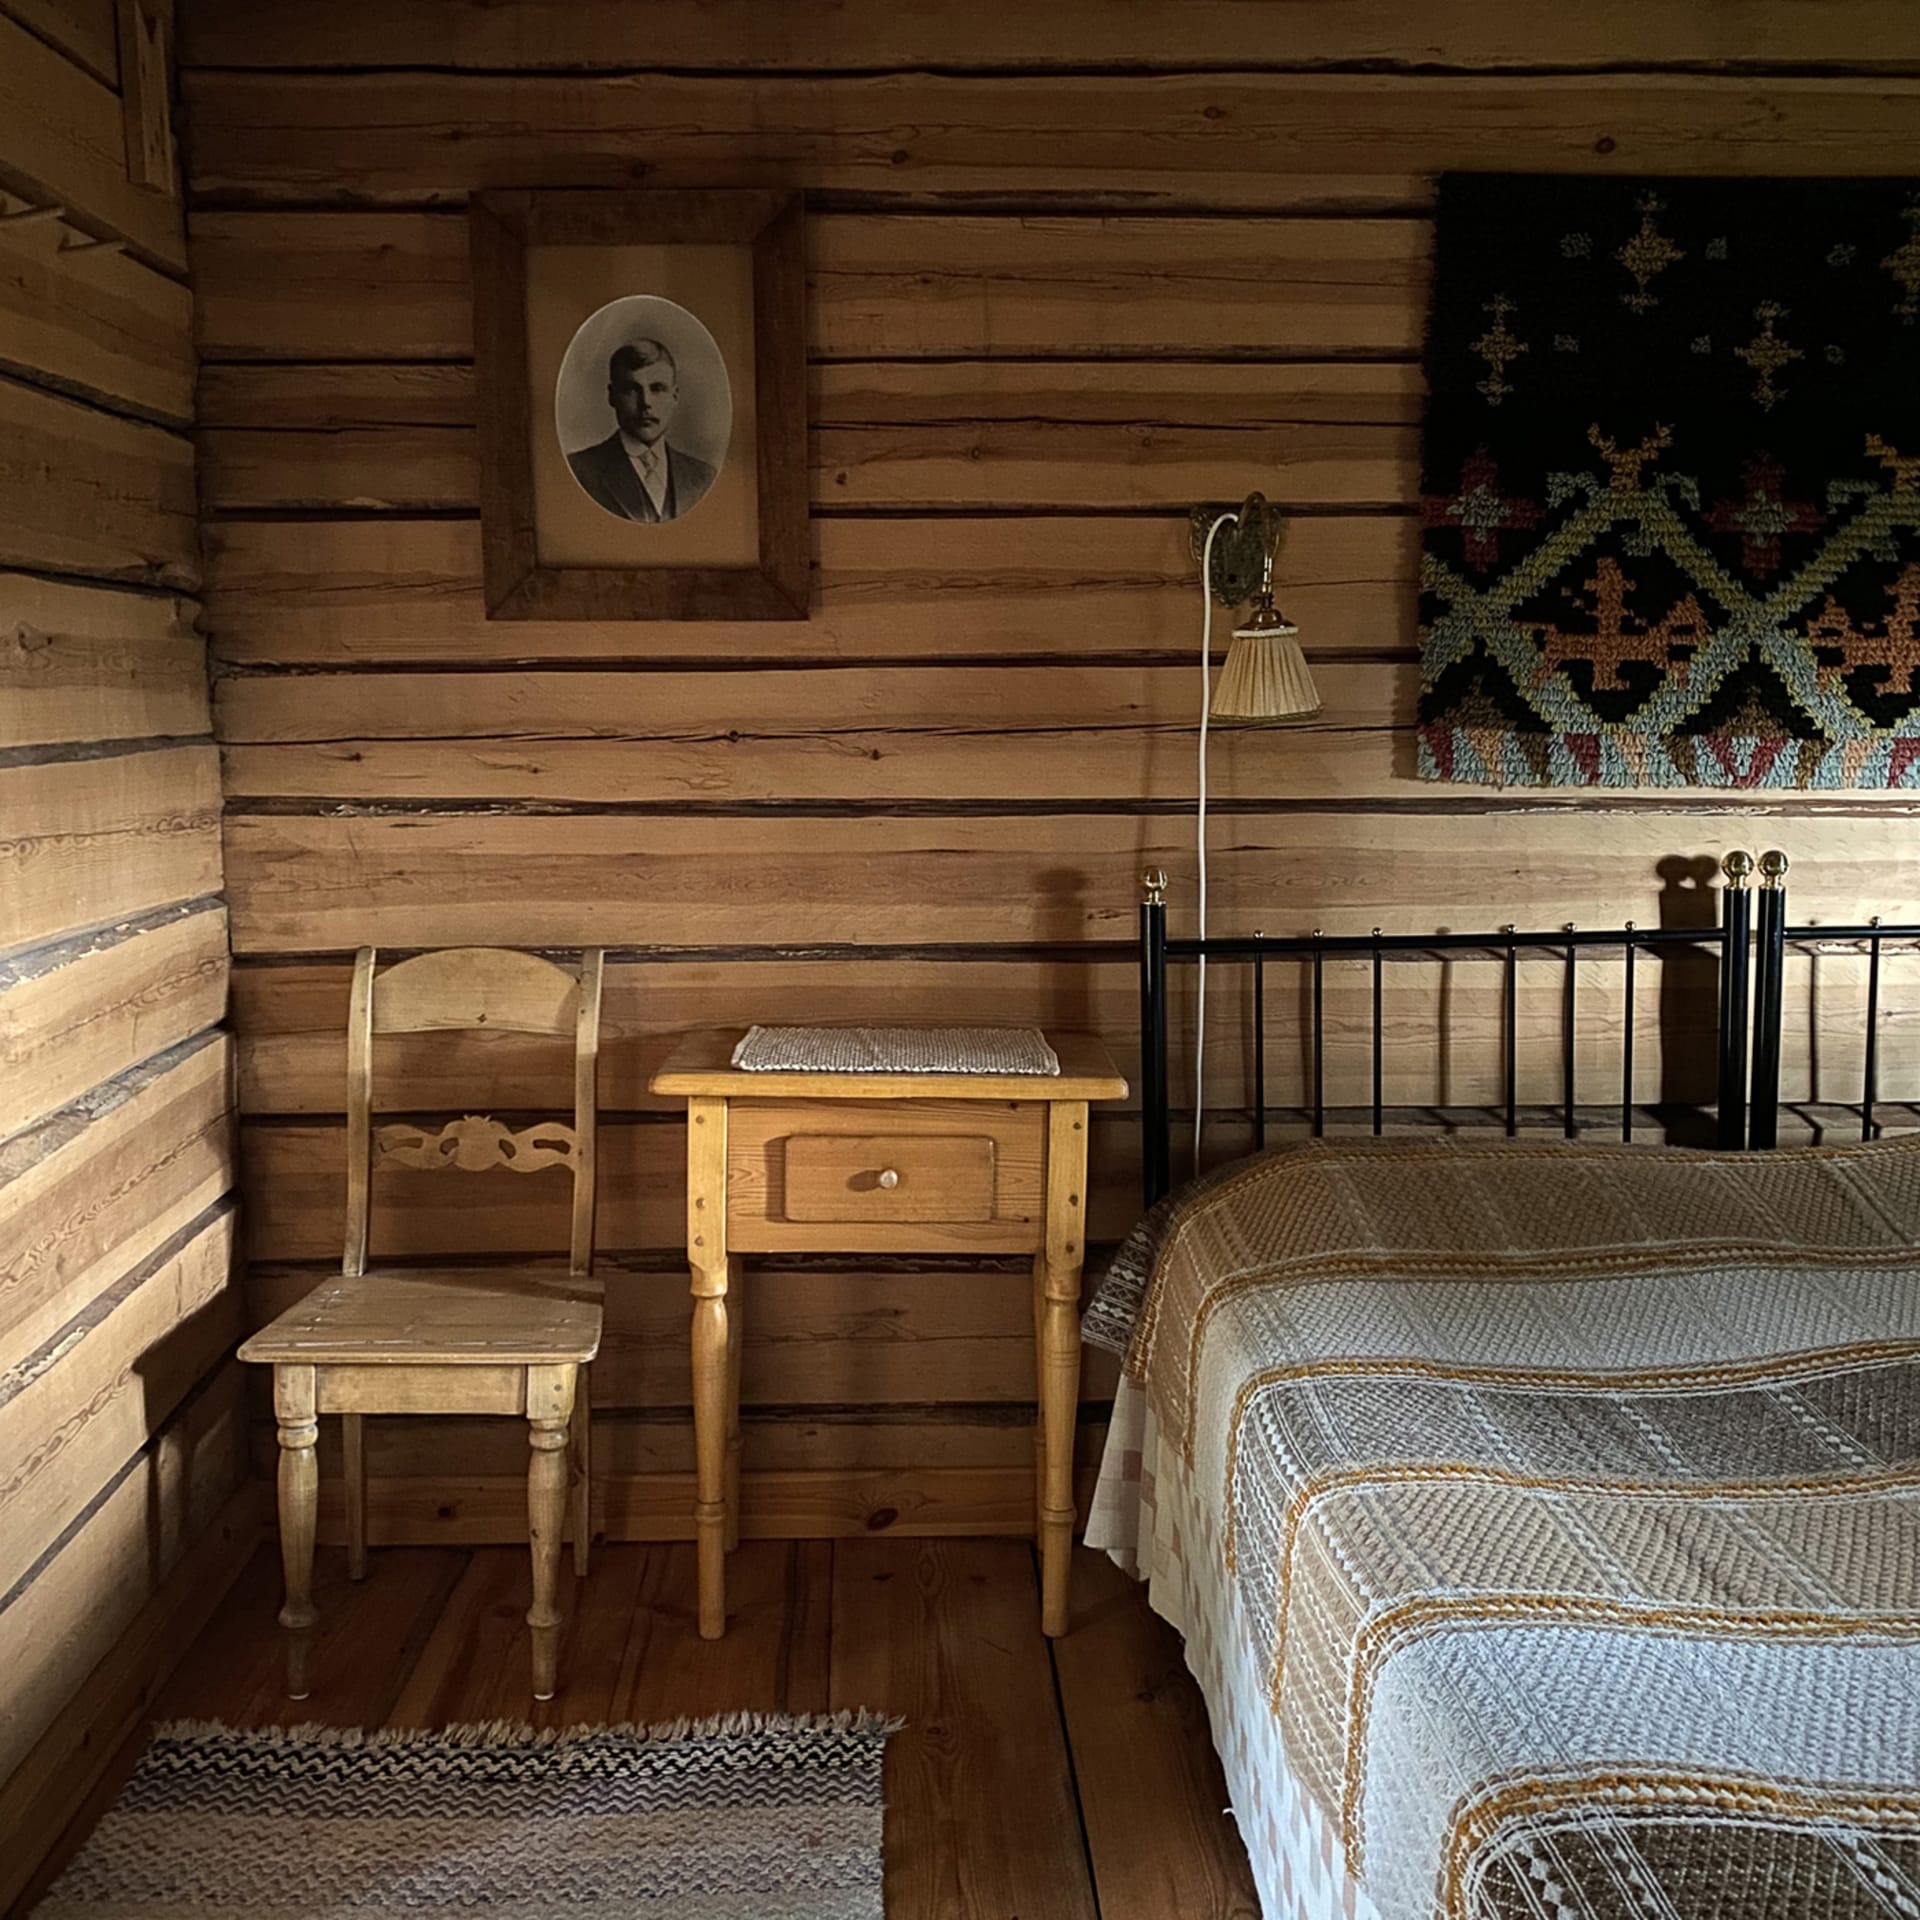 The storehouse cabins are decorated with old furniture and objects.